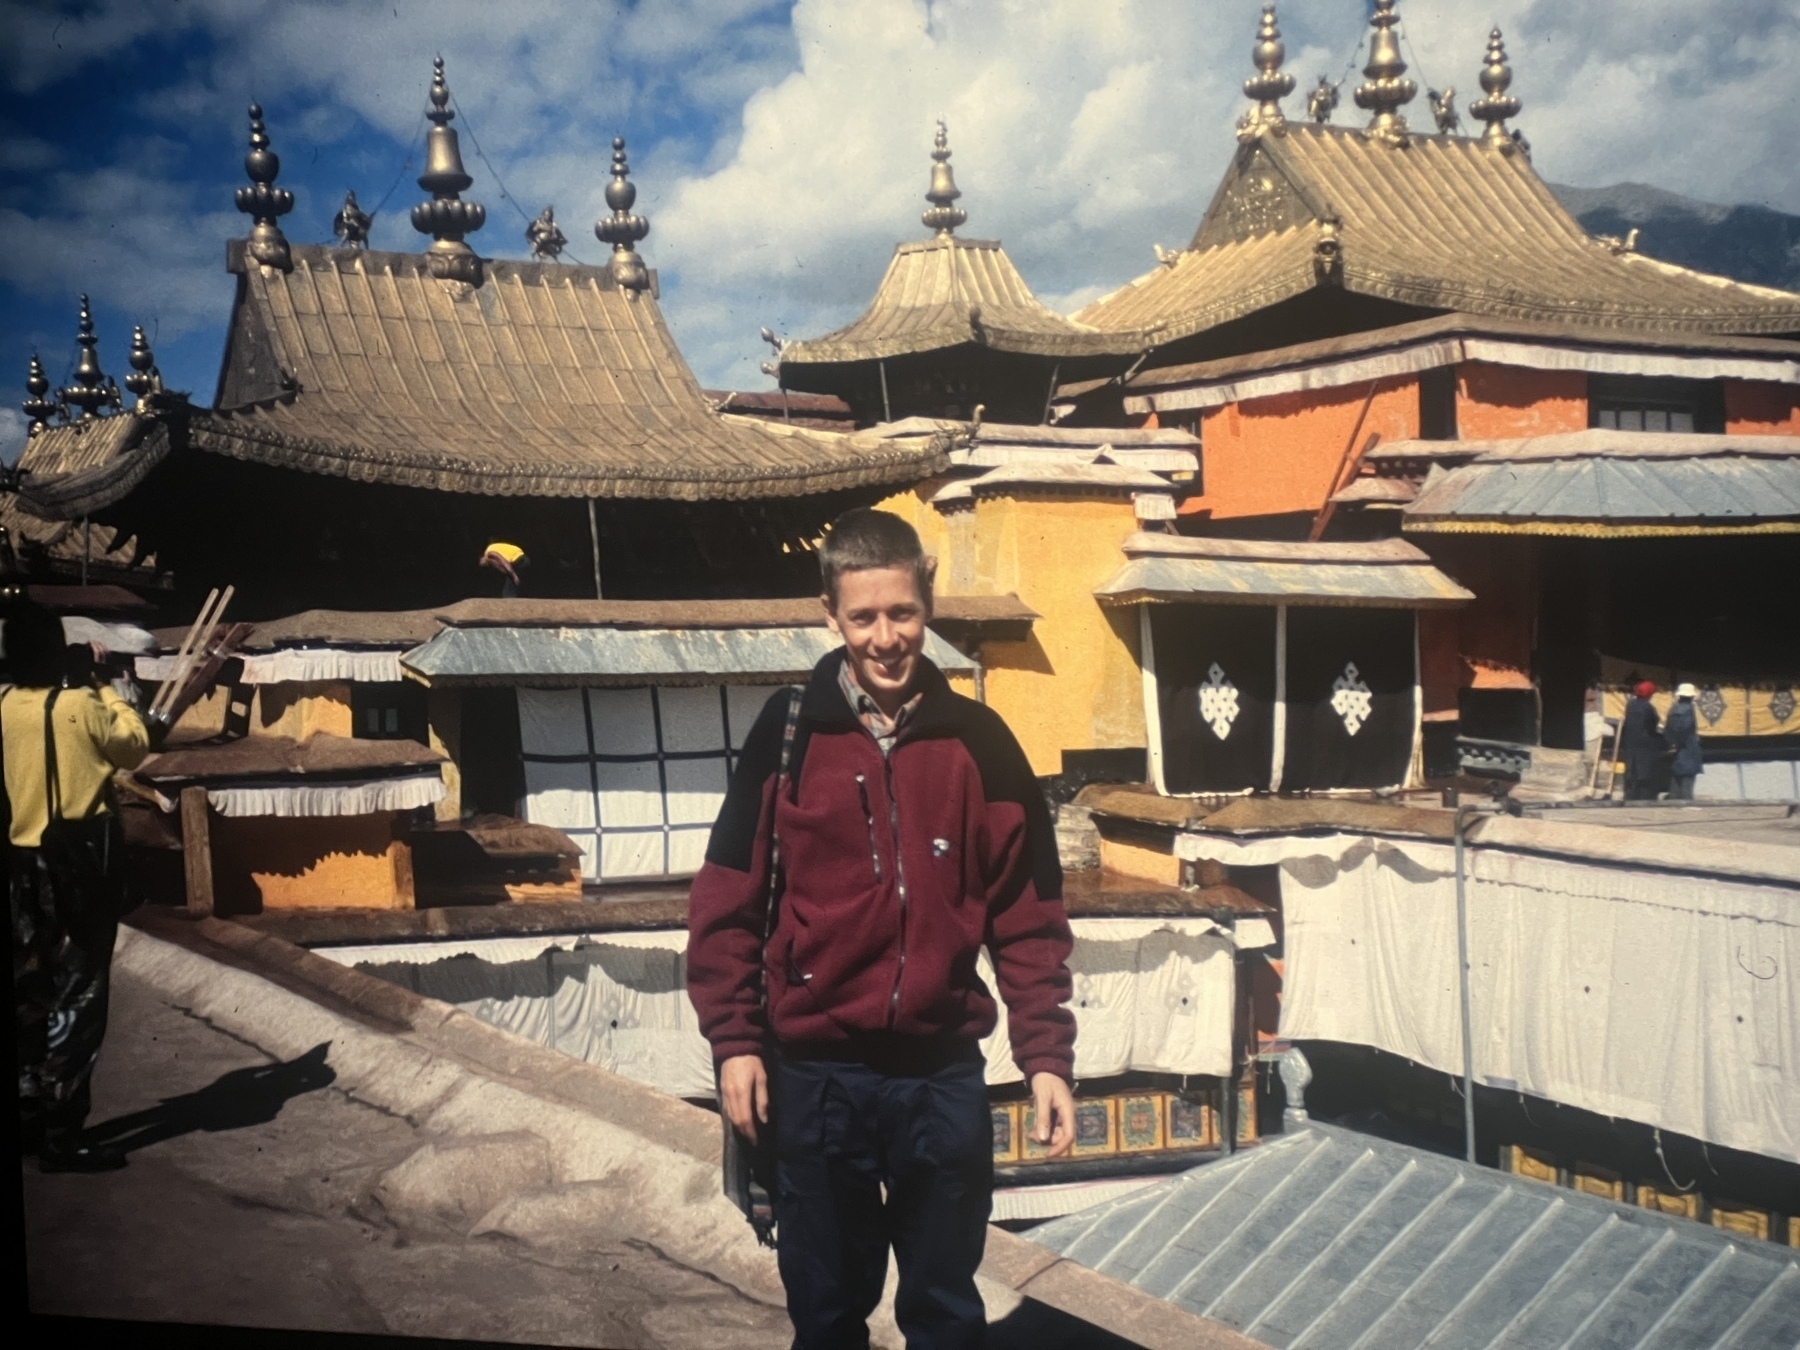 Me on the roof of the Potala Palace in Lhasa, Tibet in the 1990s